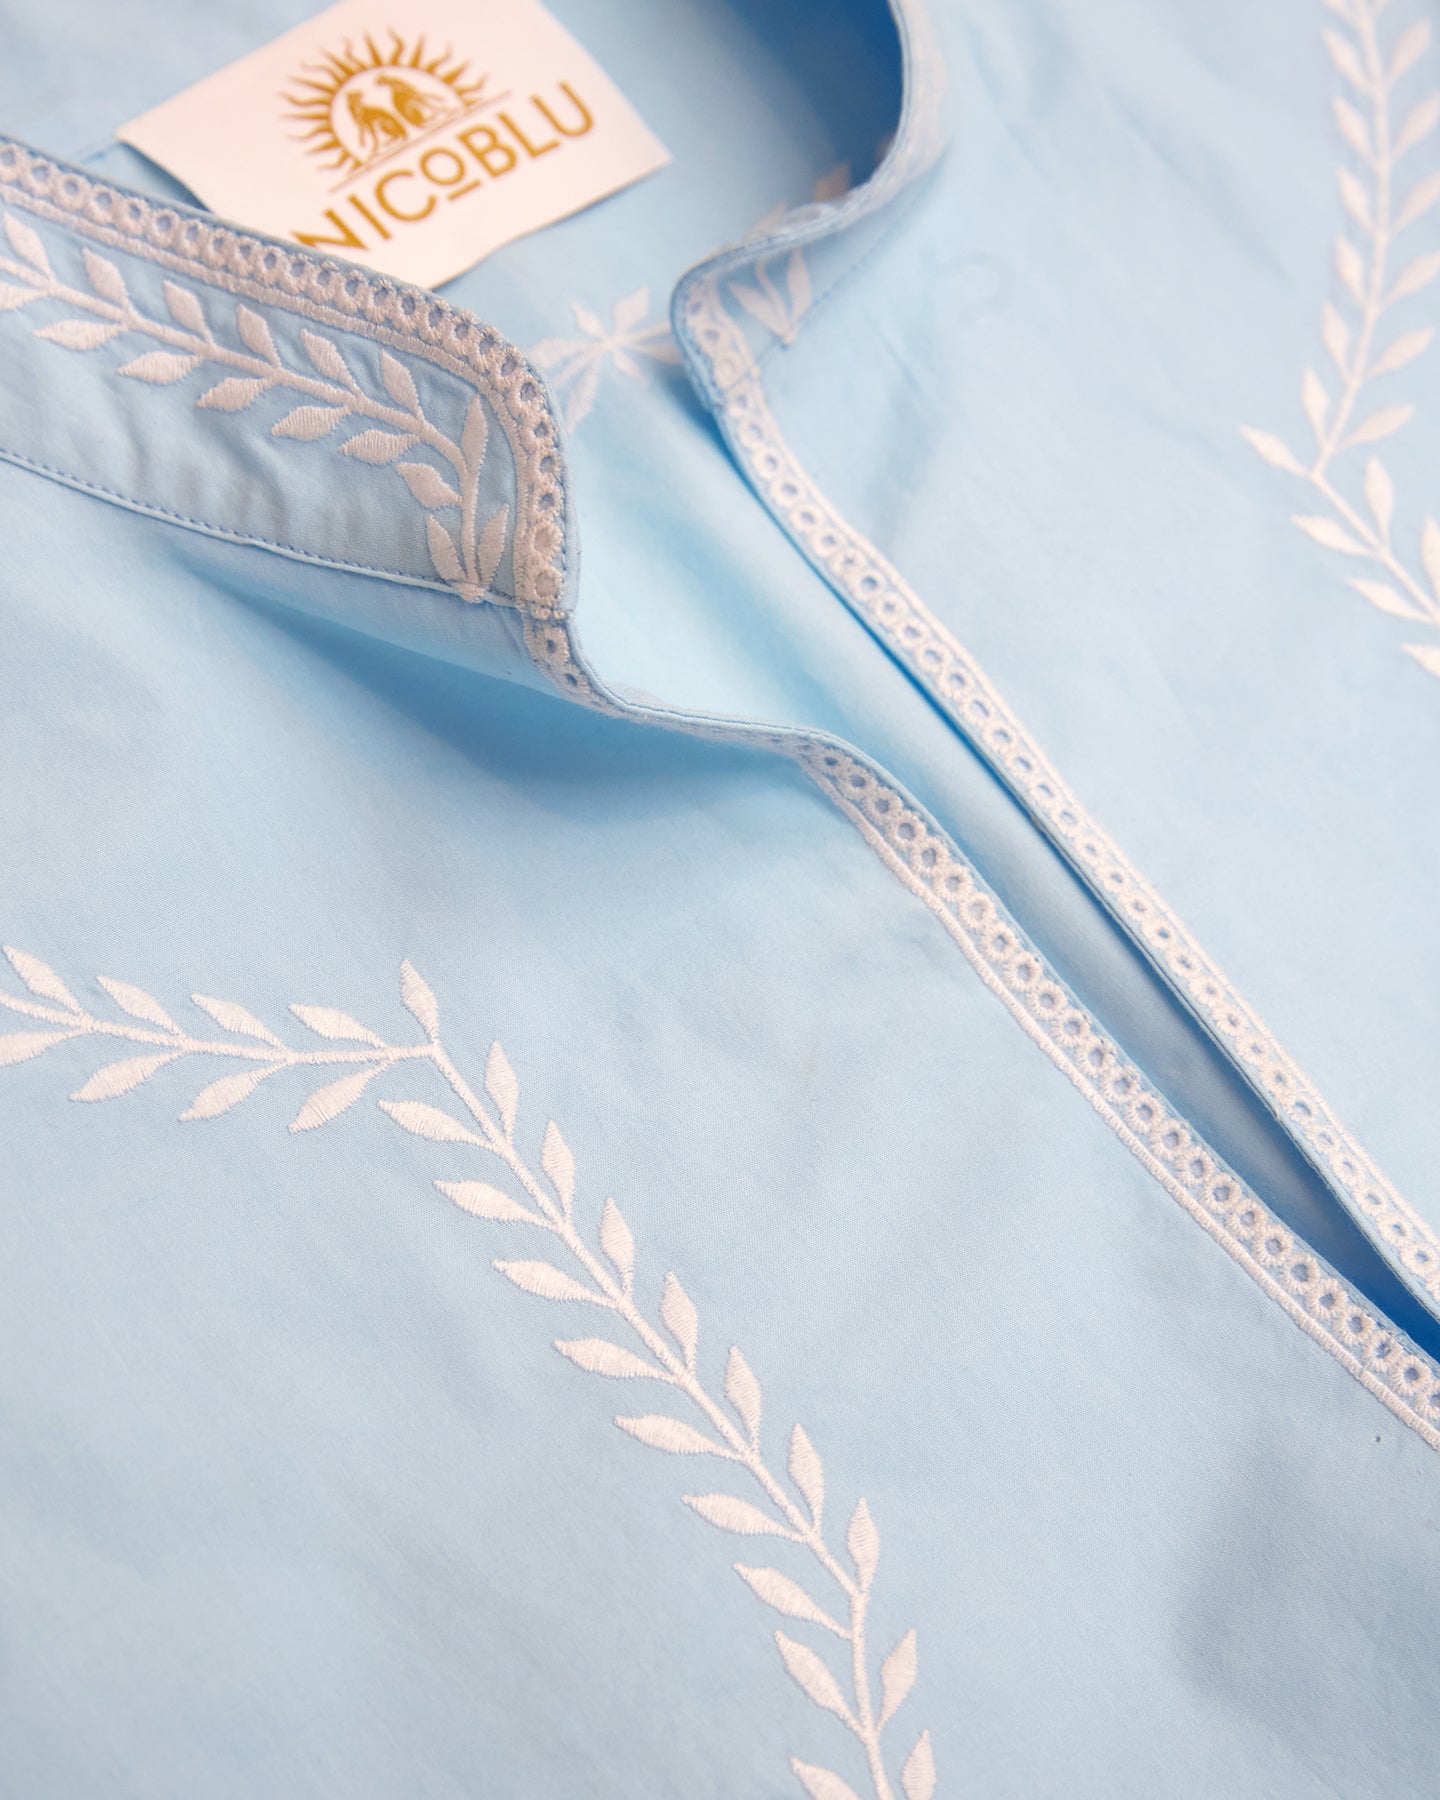 Grace Tunic in Robin Egg Blue and Laurel Embroidery-Detail of Colar and Neckline